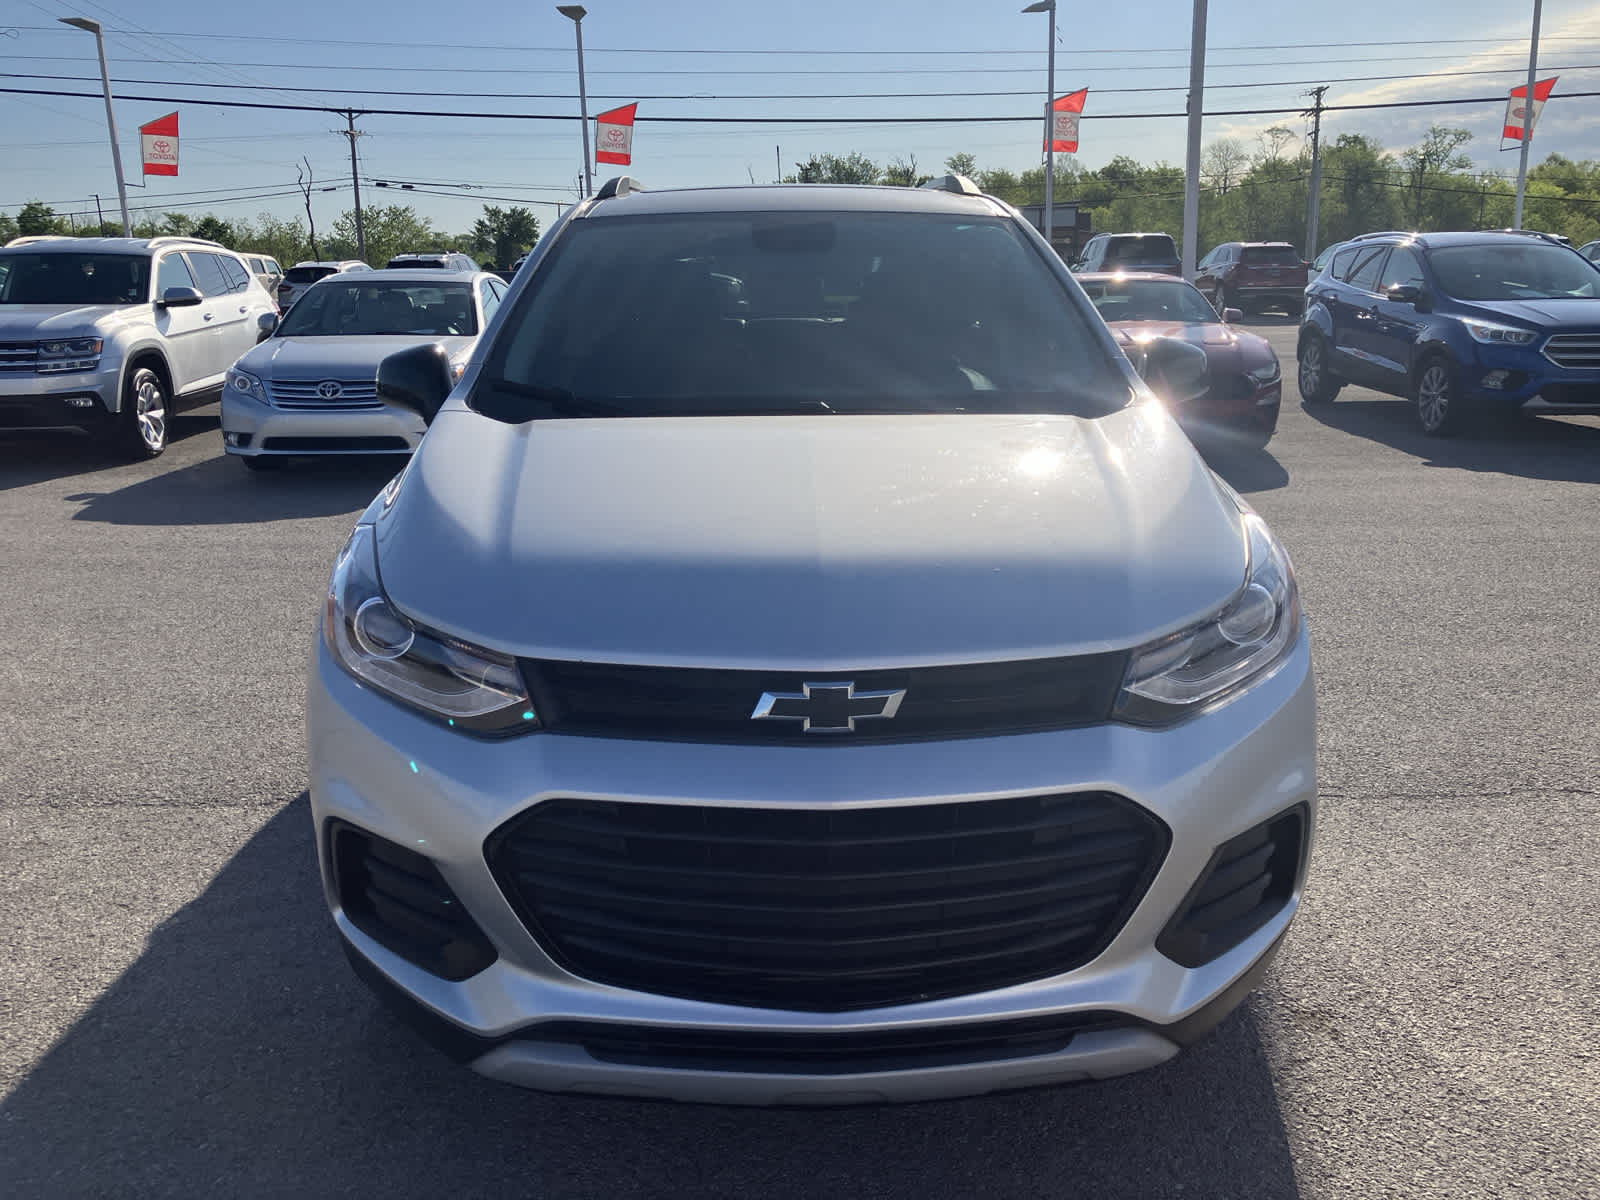 Used 2018 Chevrolet Trax LT with VIN 3GNCJPSB8JL301063 for sale in Hopkinsville, KY